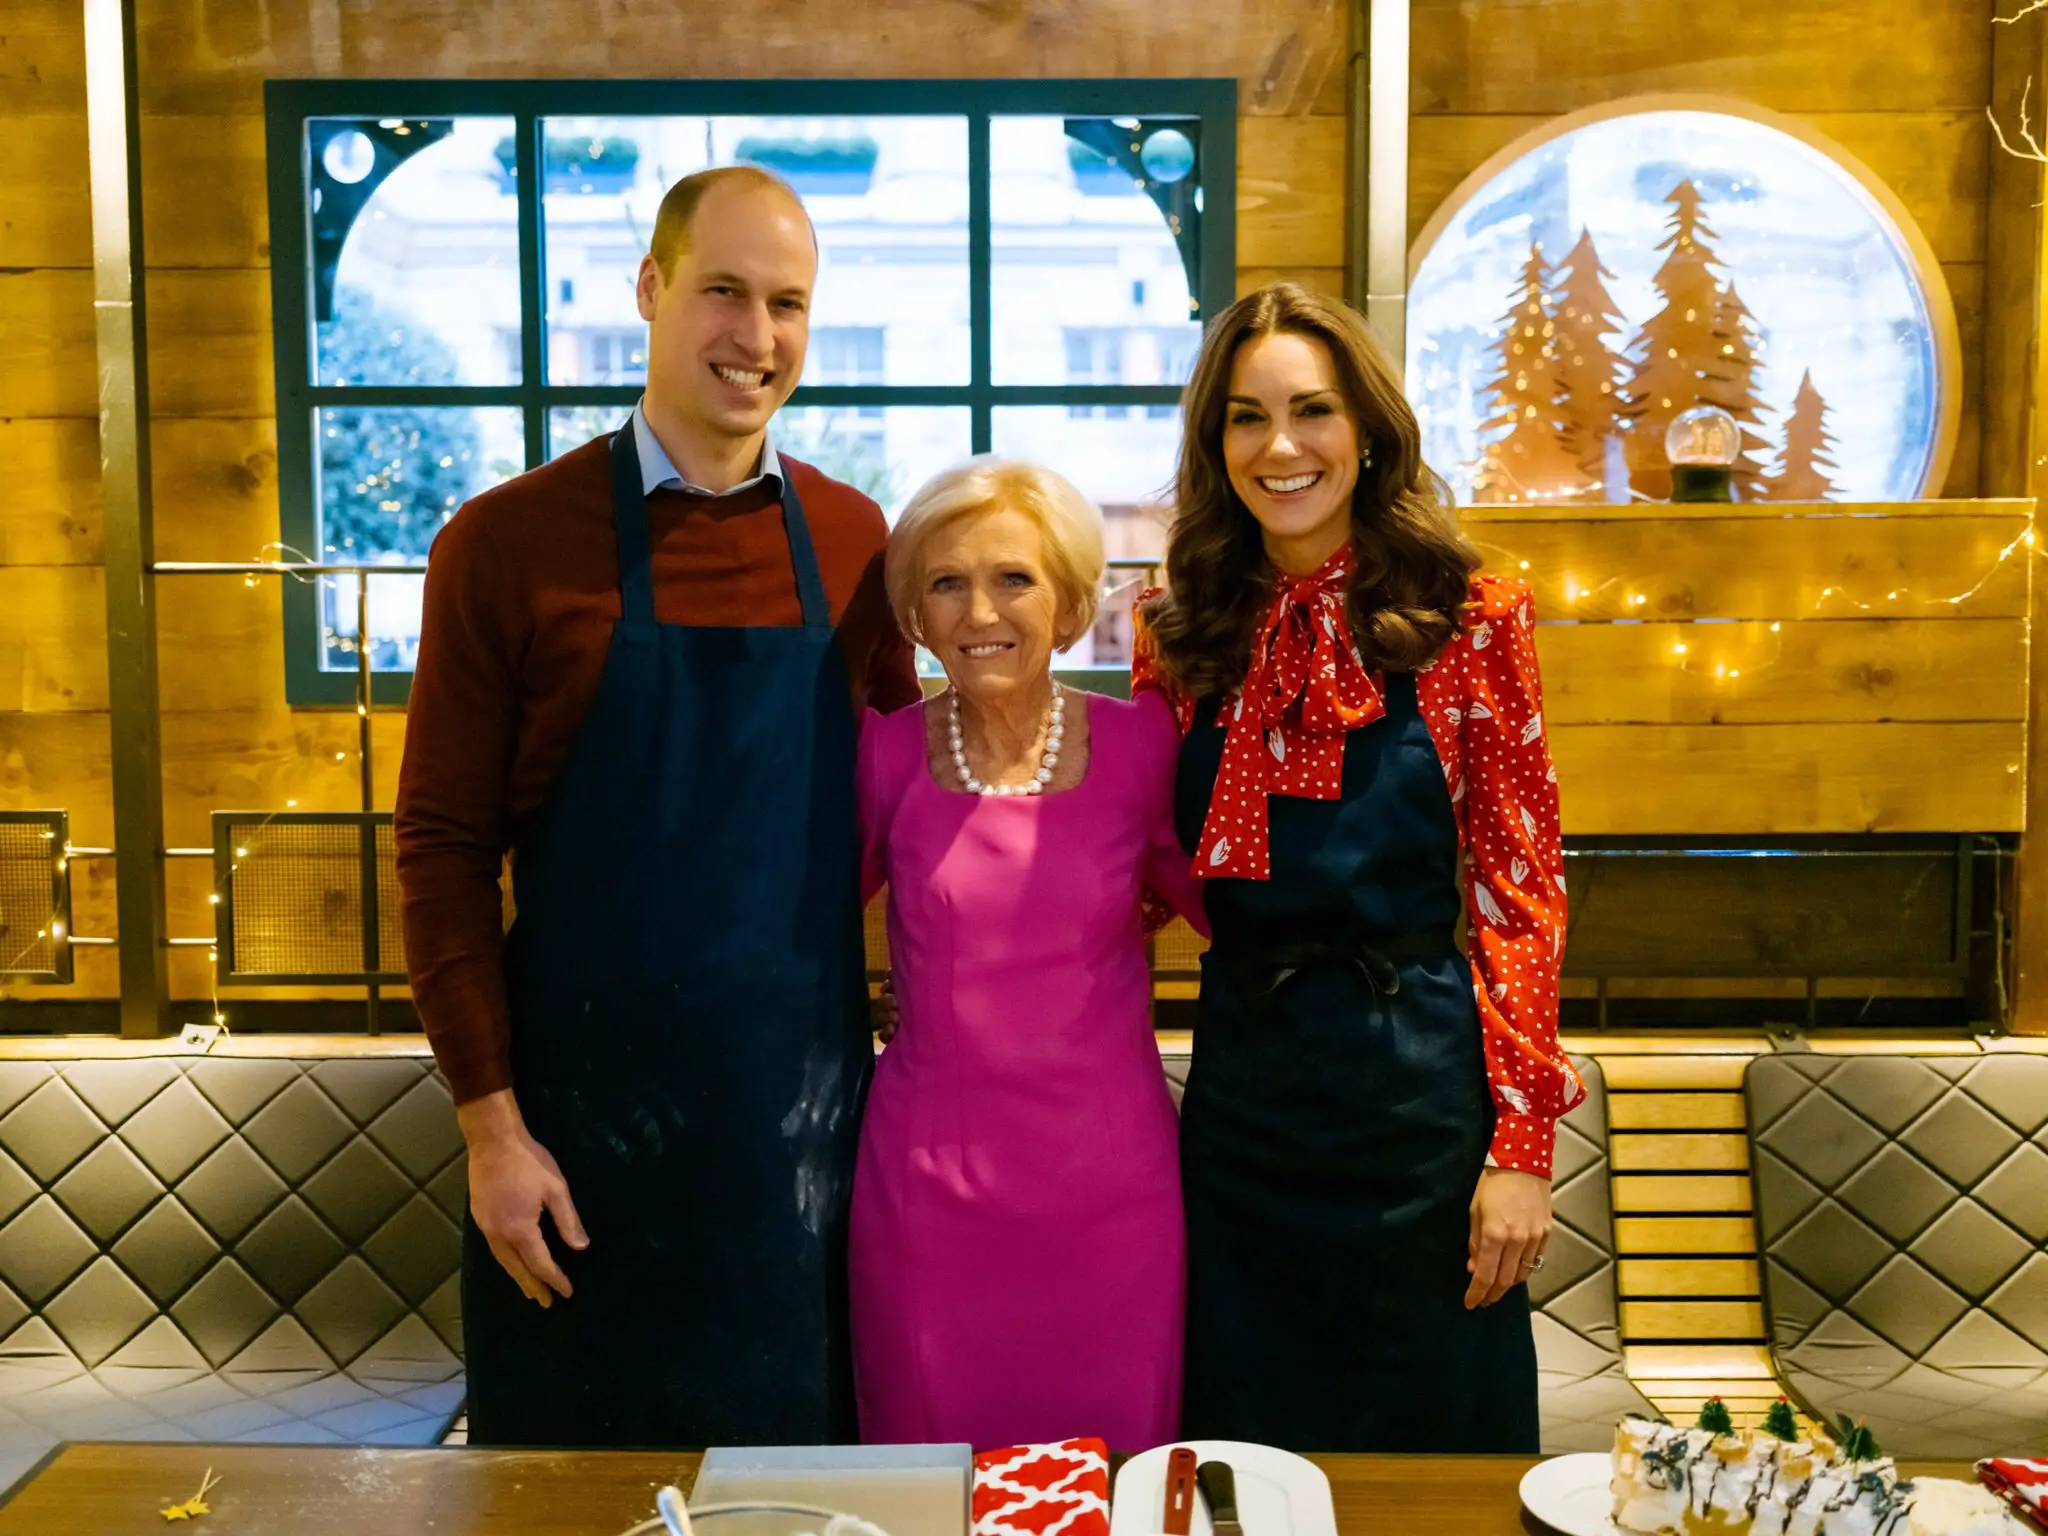 The Duke and Duchess of Cambridge joined Mary Berry at BBC Christmas Special